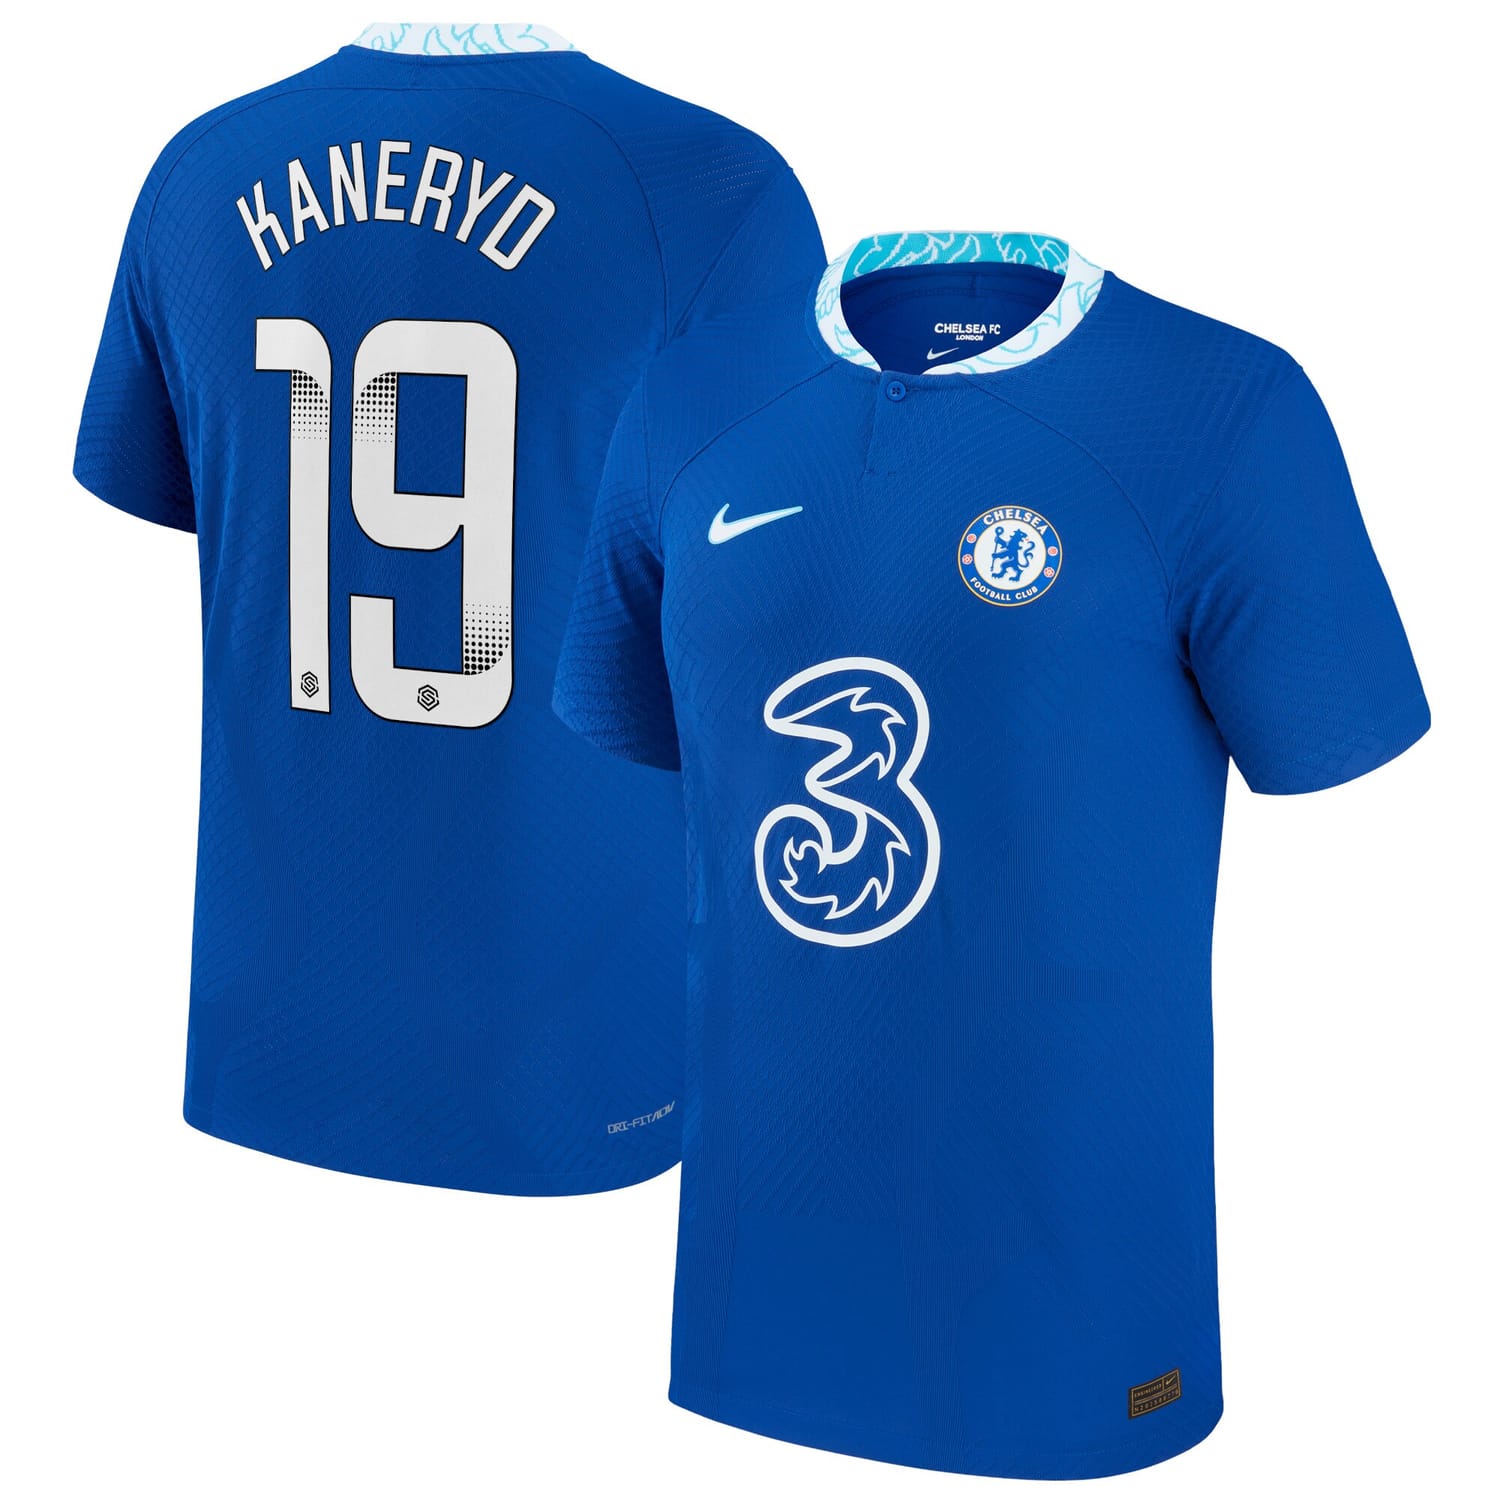 Premier League Chelsea Home WSL Authentic Jersey Shirt 2022-23 player Johanna Rytting Kaneryd 19 printing for Men